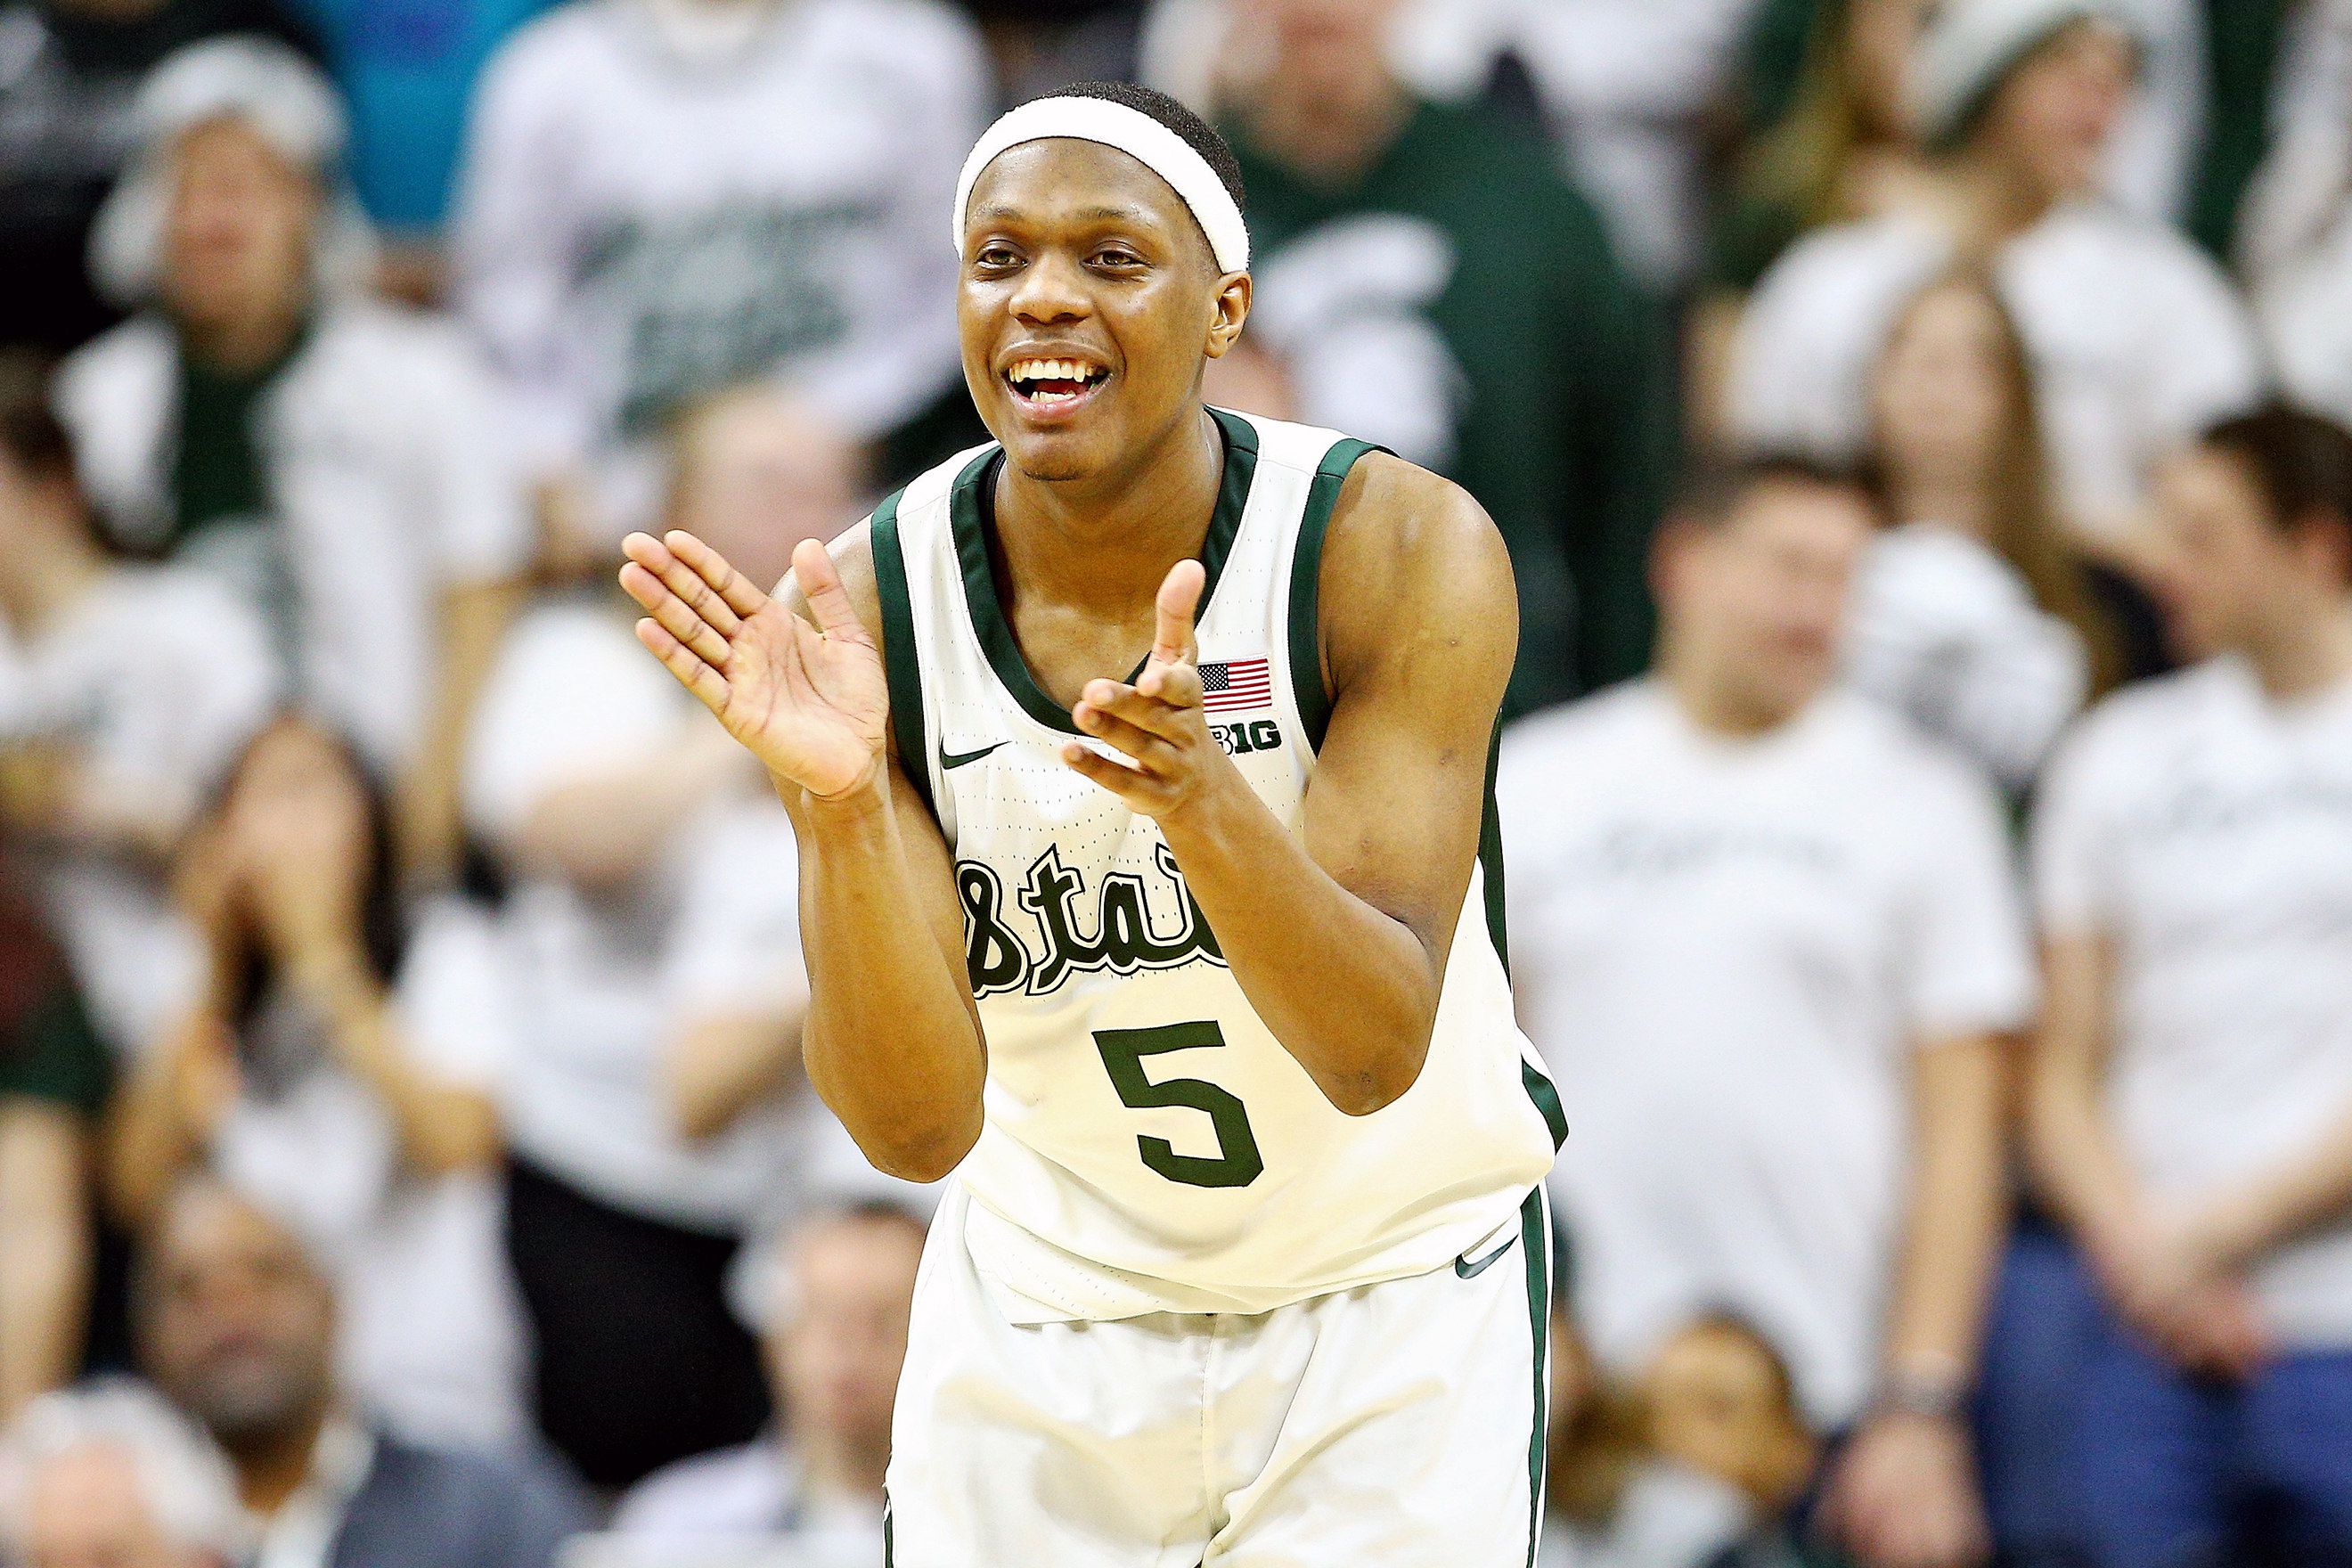 Michigan State Basketball Schedule 2022 2023 See Michigan State's Full 2019-20 Basketball Schedule - Mlive.com